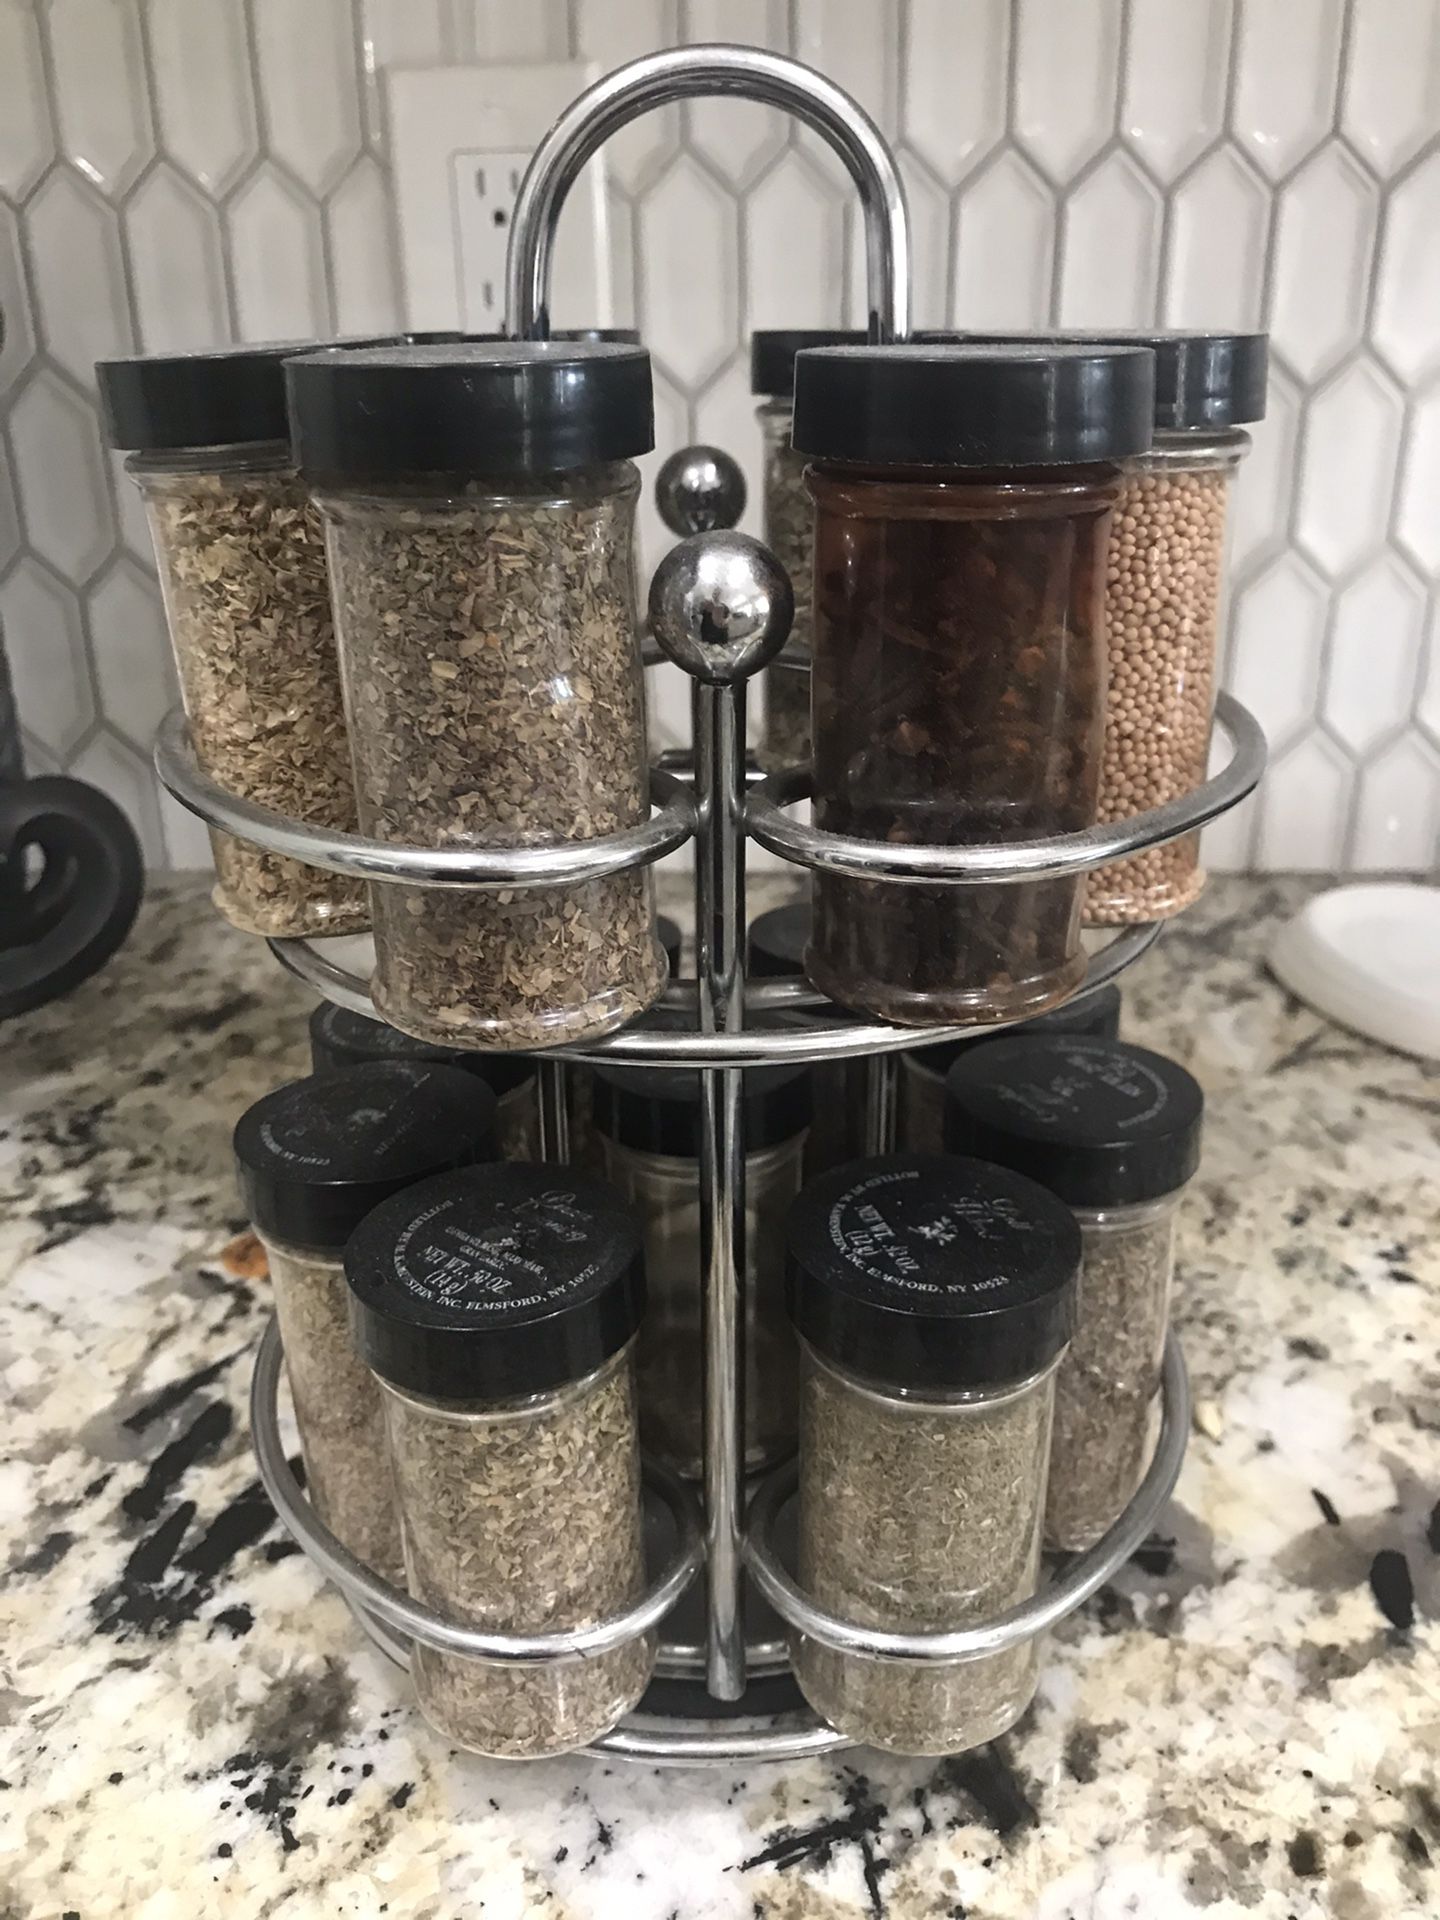 Spice Metal Spin Rack Includes Spices